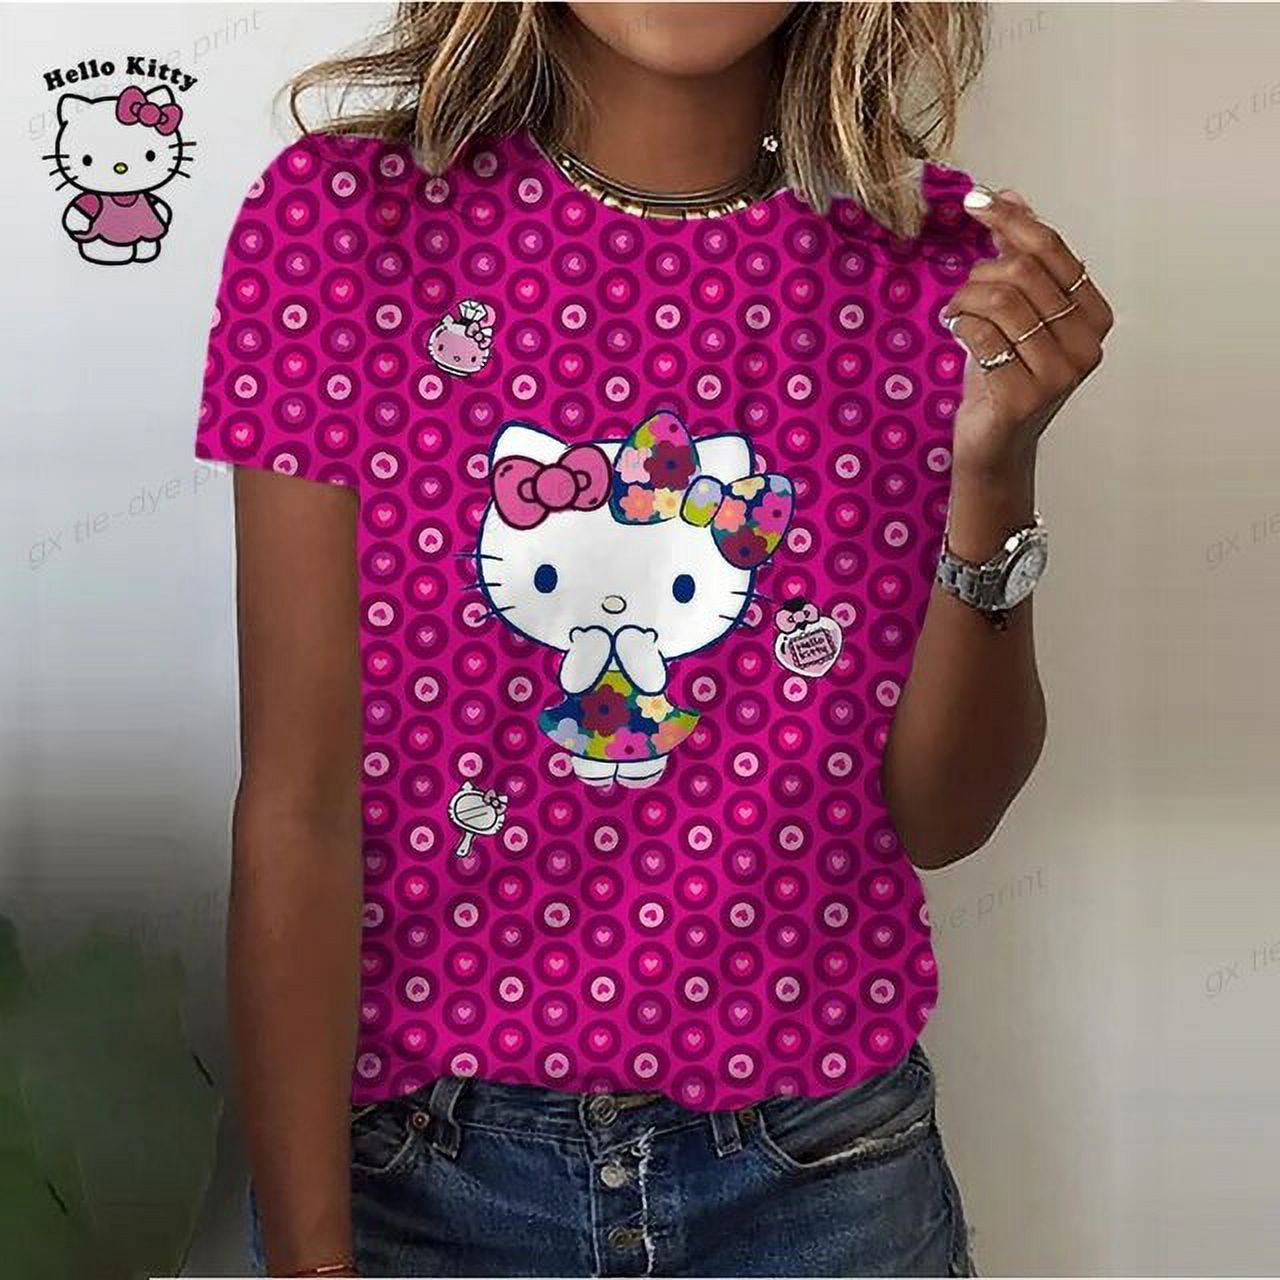 Summer Women‘s T Shirt For Ladies‘s Short Sleeve Tops Tees Fashion Print Hello Kitty Graphics T-shirt For Women‘s Y2k Clothing - image 1 of 7